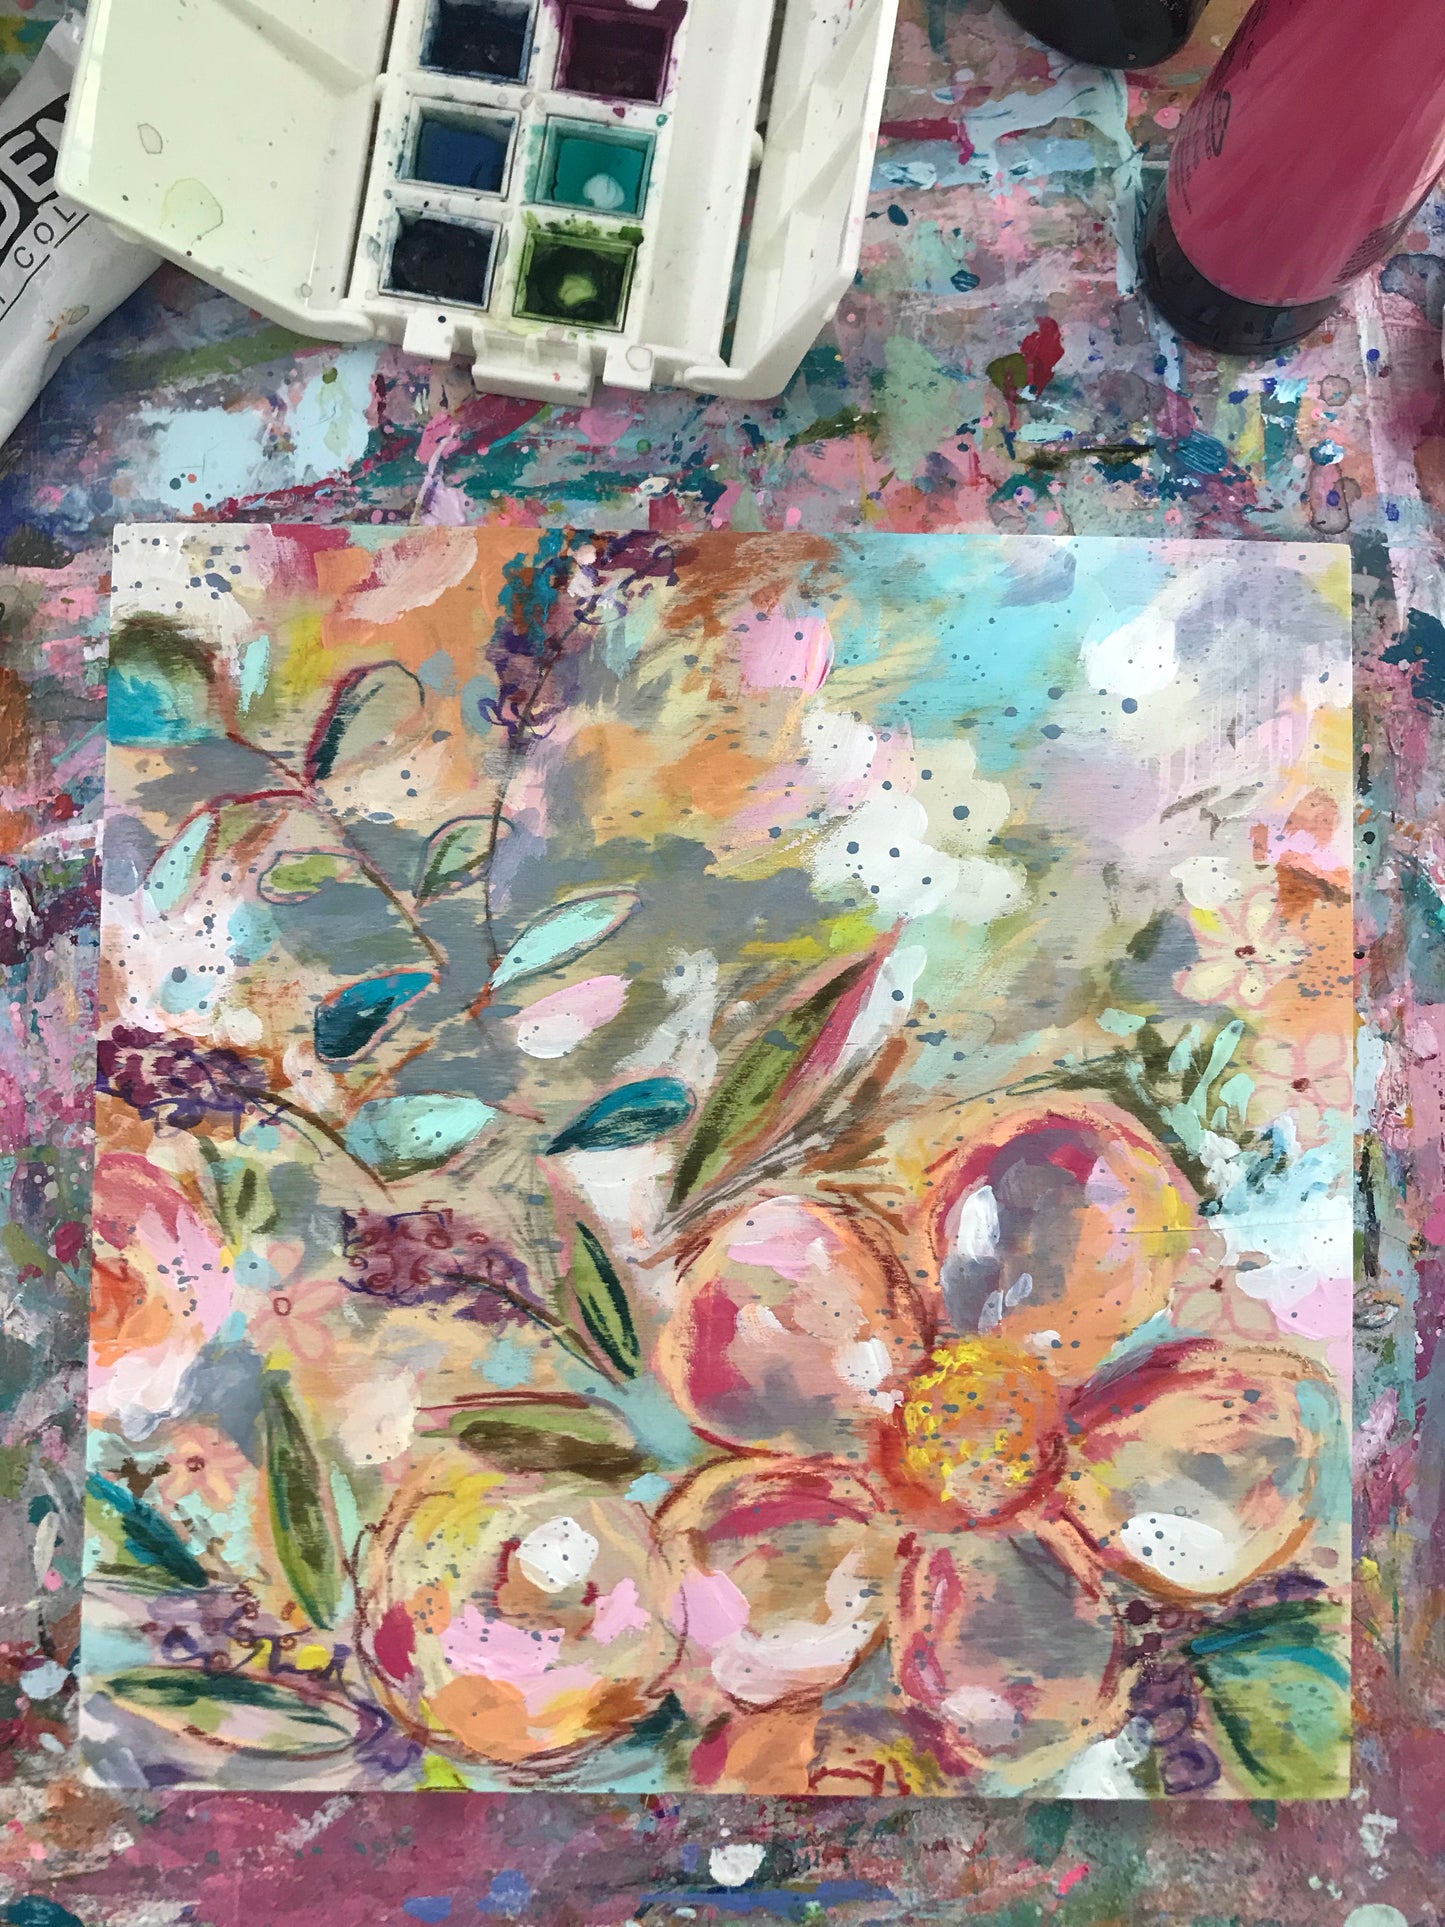 New Spring Floral Mixed Media Painting on 8x8 inch wood panel no.10 - Bethany Joy Art